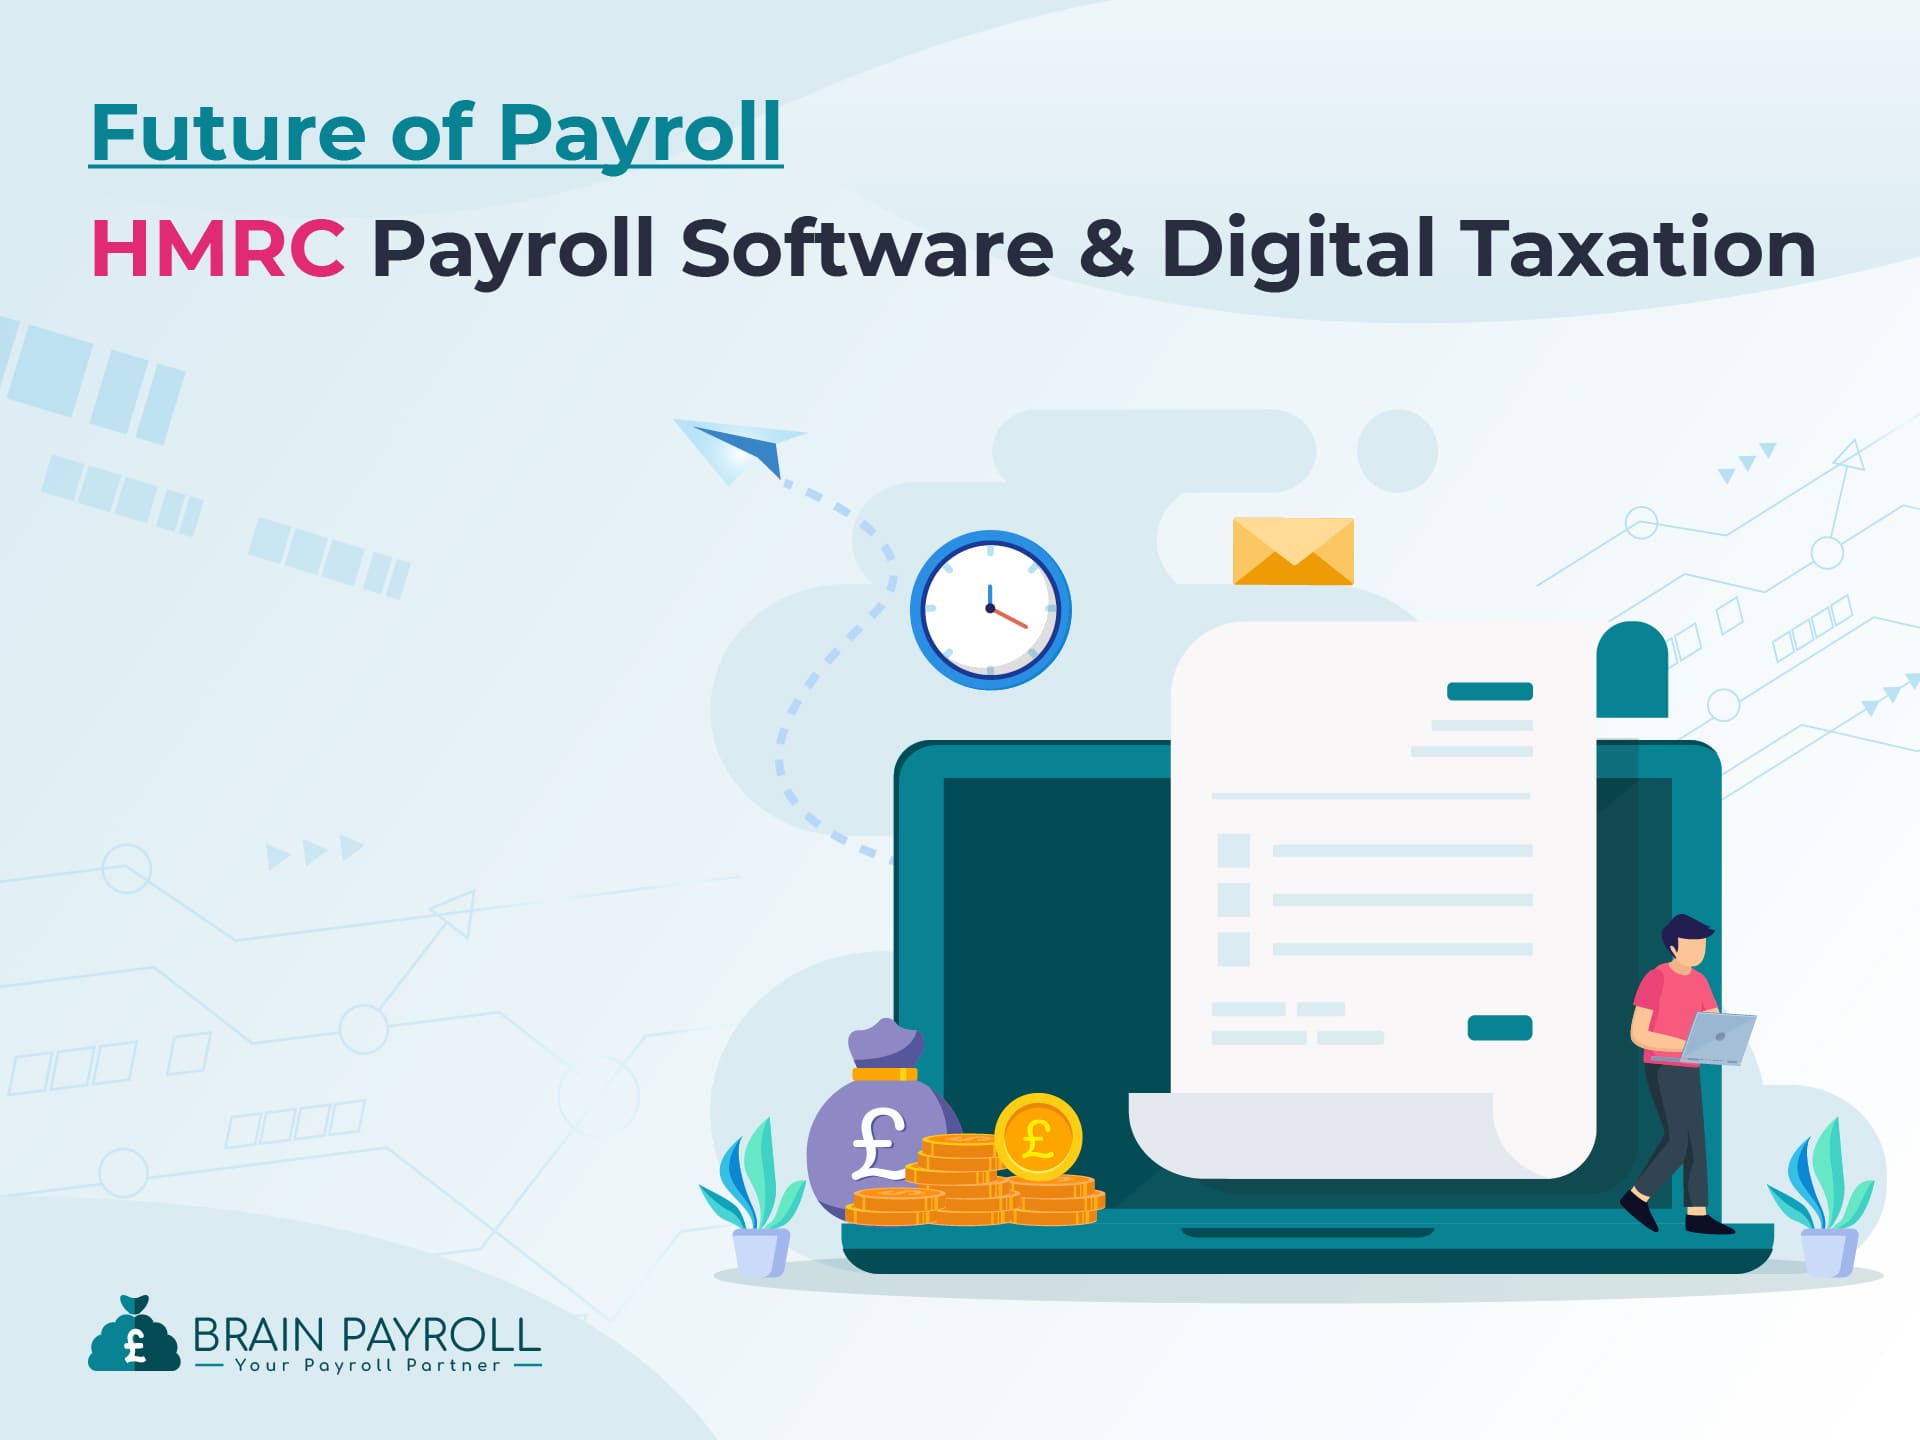 The Future of Payroll: HMRC Payroll Software and Digital Taxation